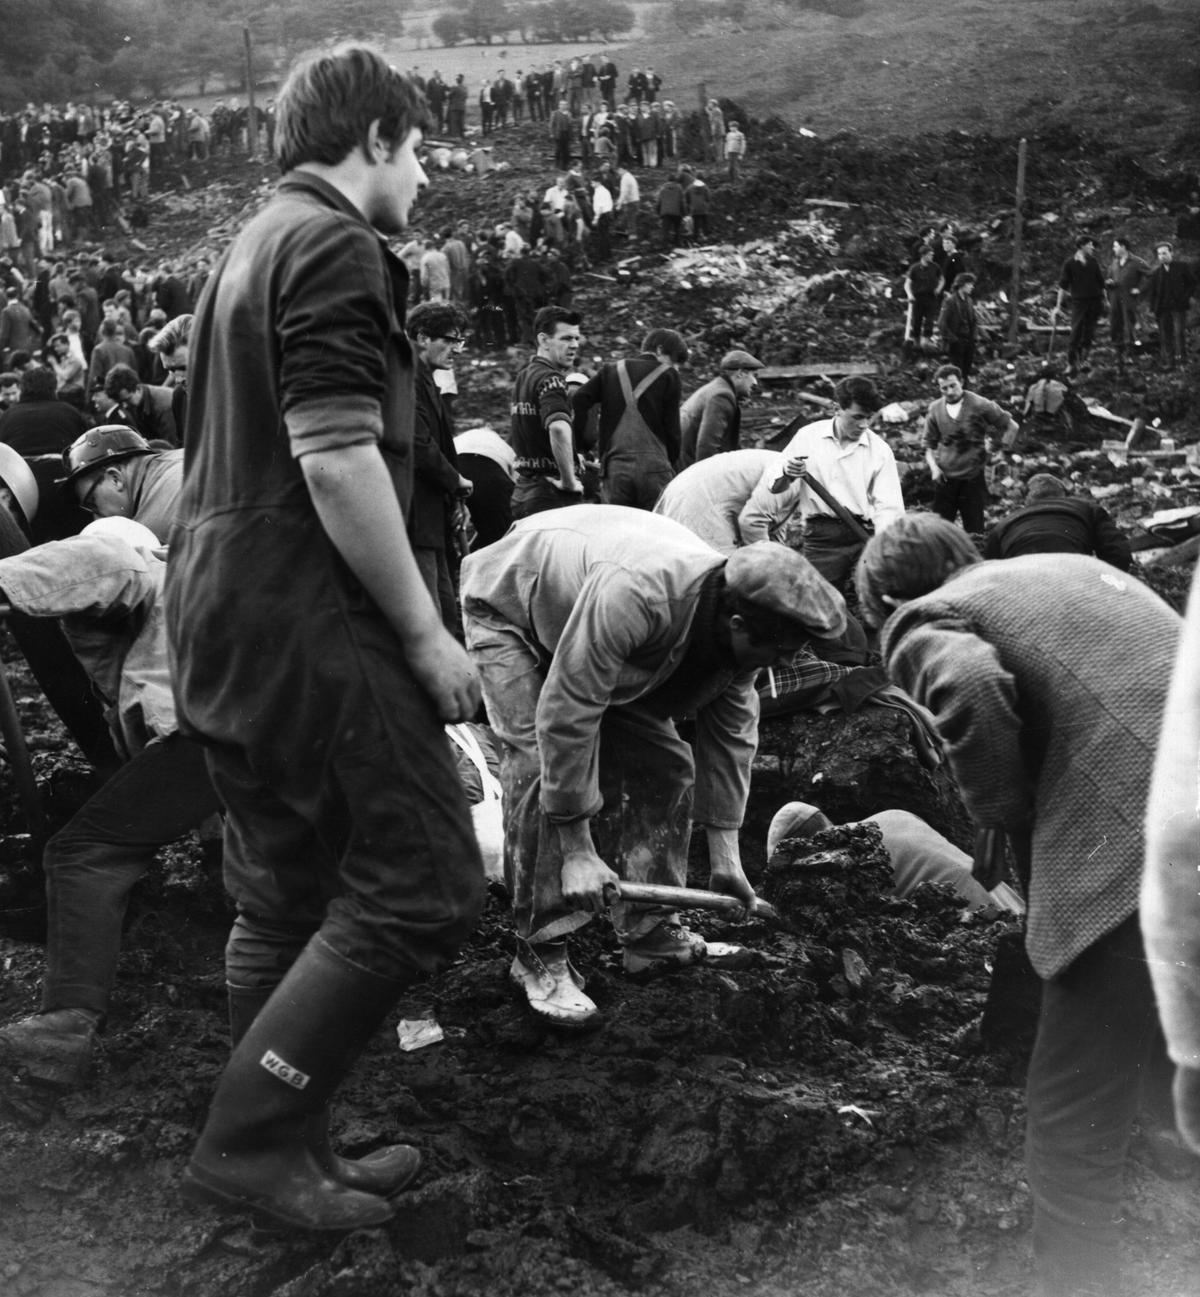 Rescue workers clearing debris and sludge on Oct. 22, 1966, near the wrecked Pantglas Junior School at Aberfan, South Wales, where a coal tip collapsed killing many children. (Keystone/Getty Images)